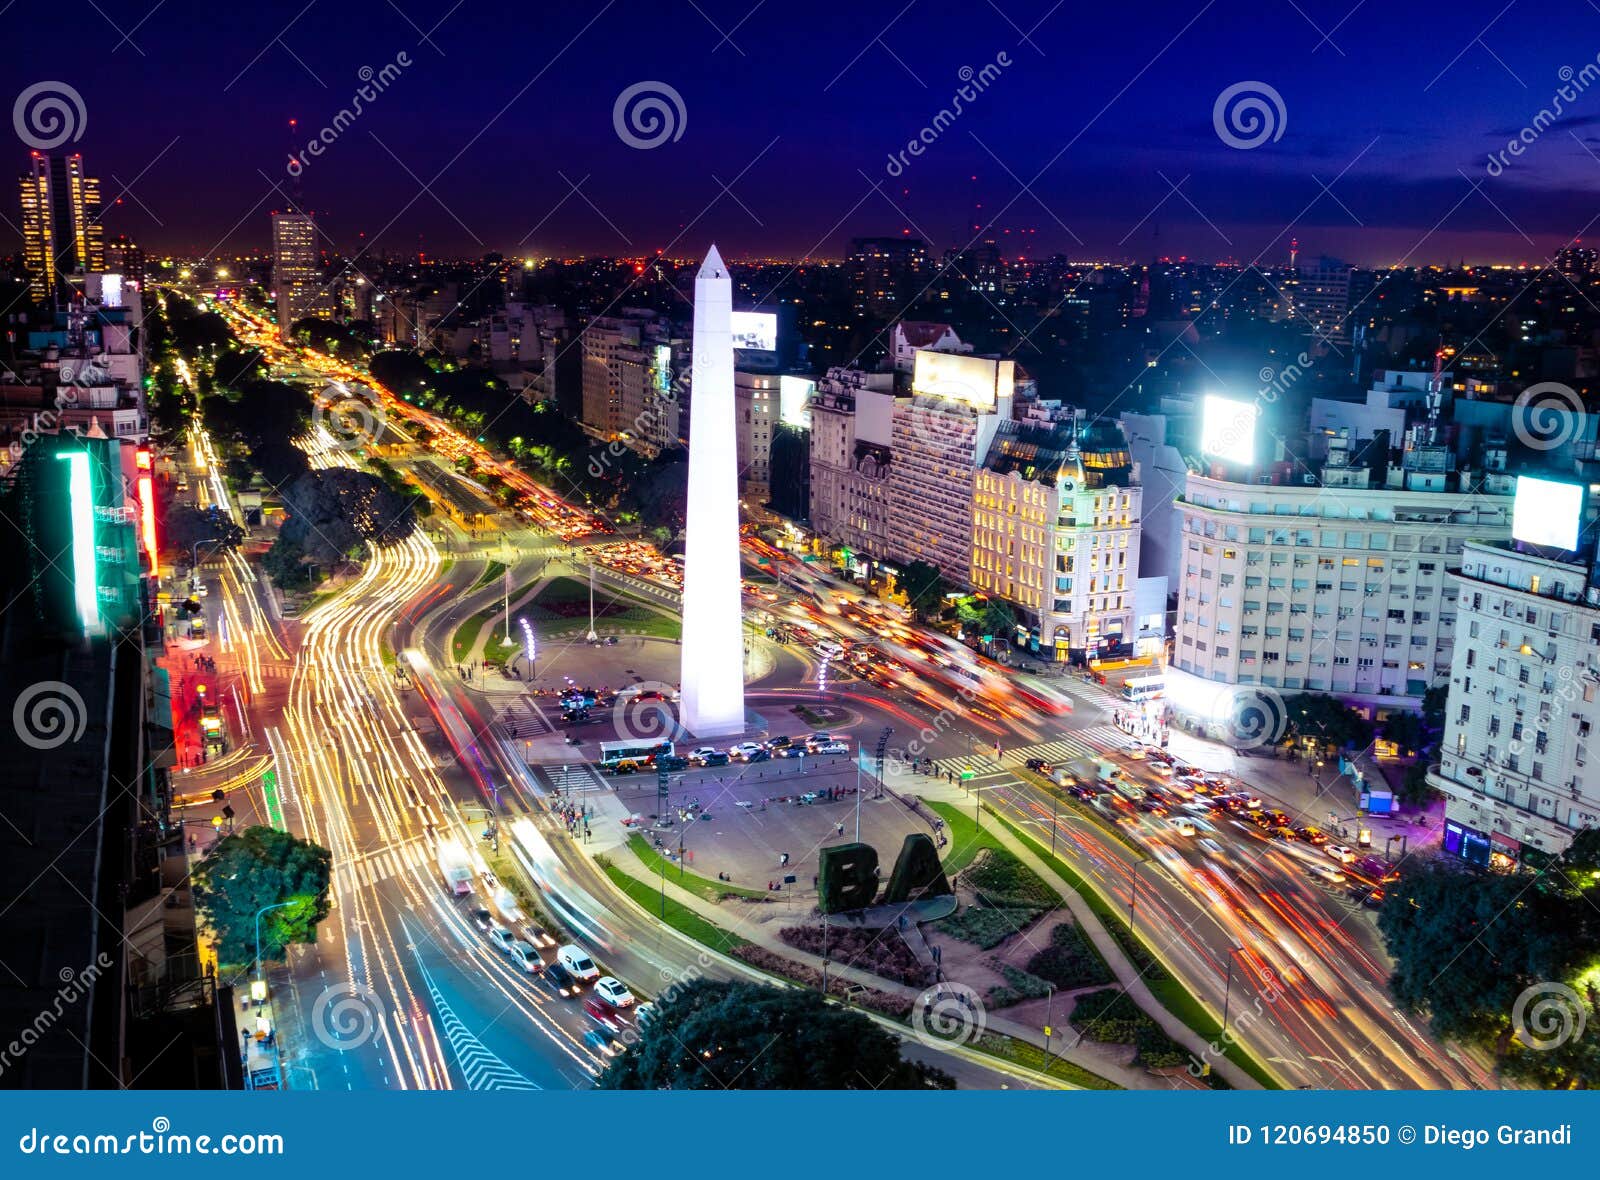 colorful aerial view of buenos aires and 9 de julio avenue at night - buenos aires, argentina